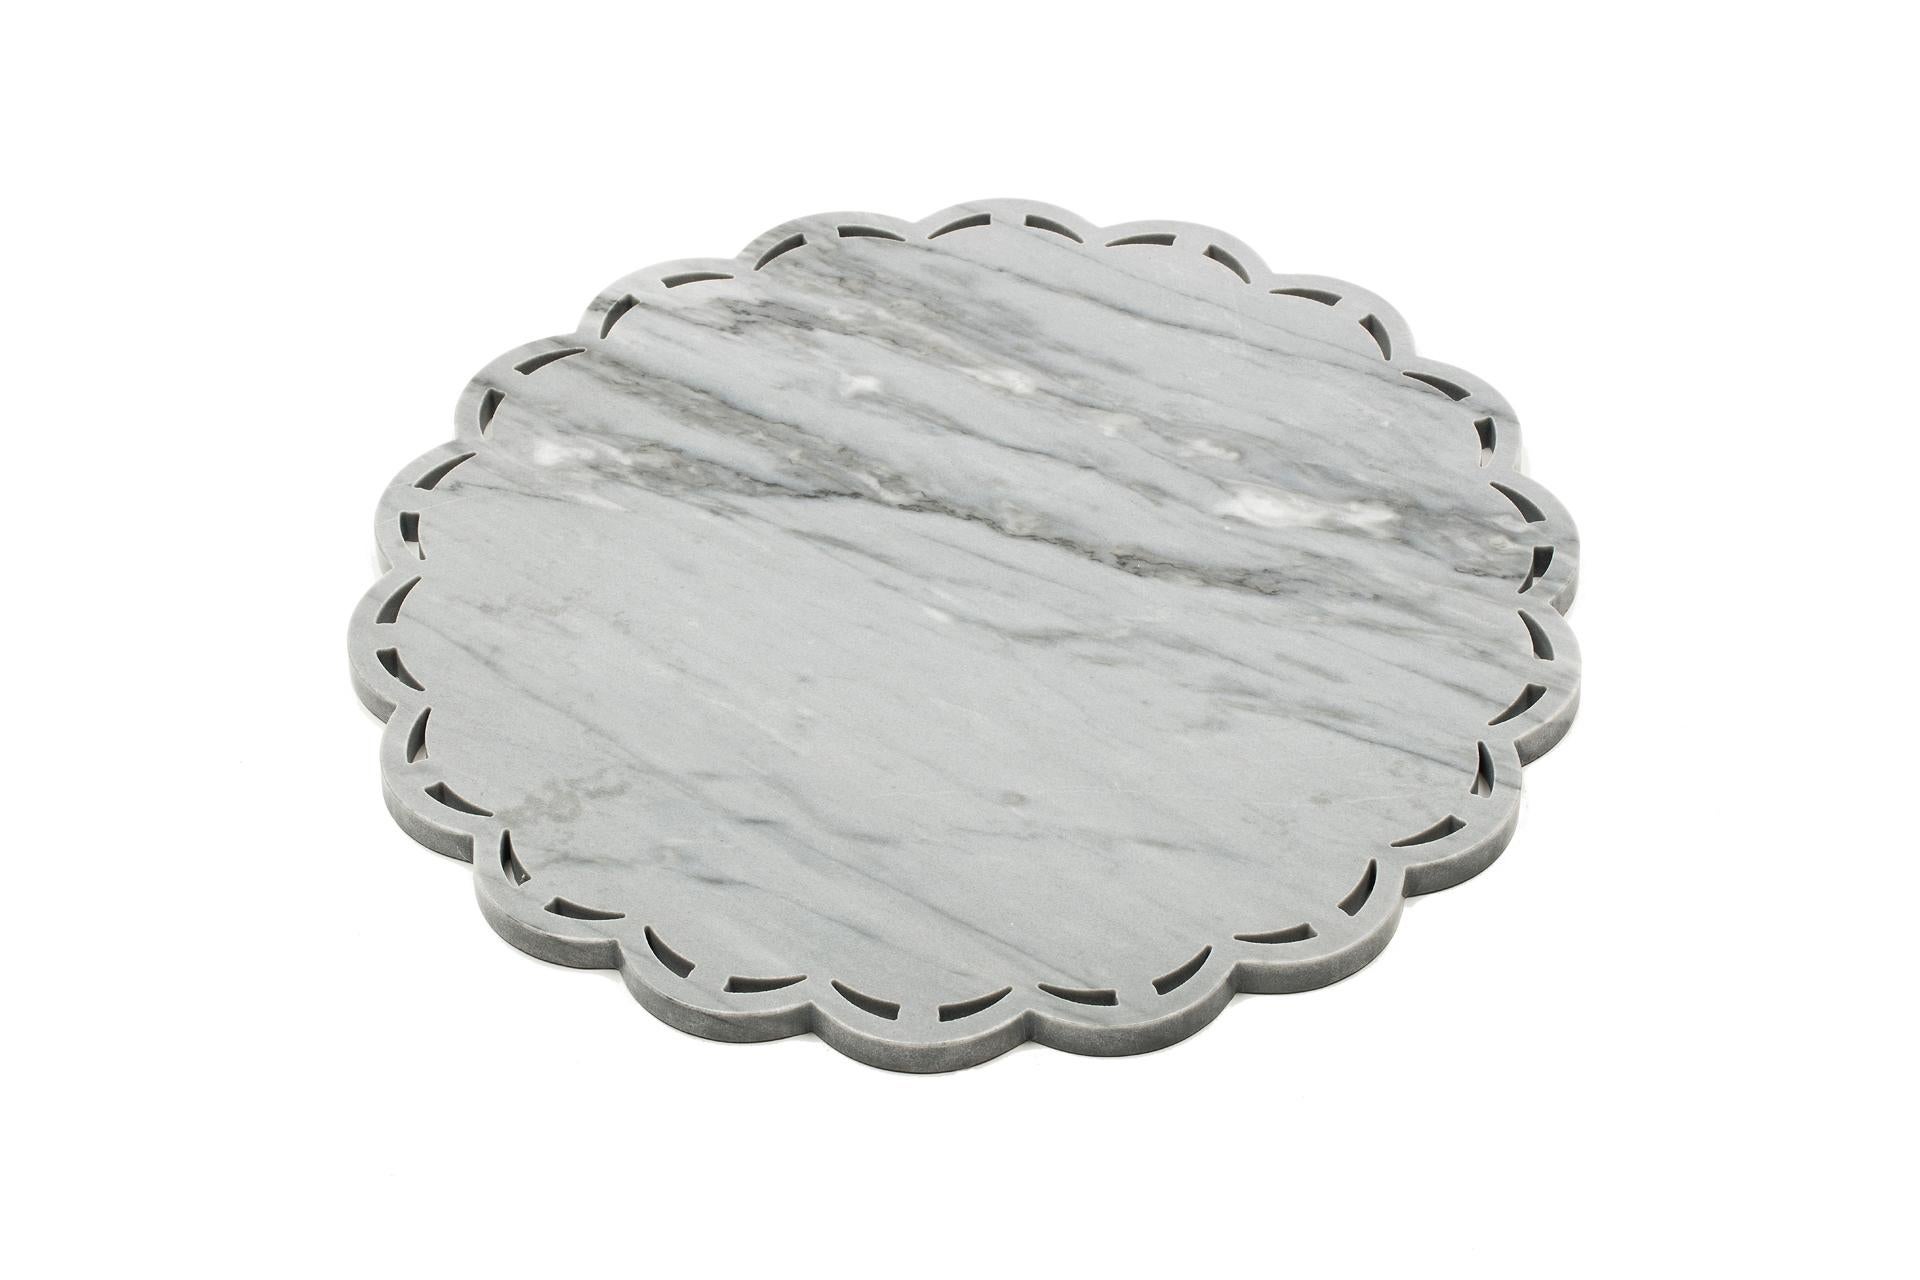 Italian Round Marble Tray or Plate with Lace Edge